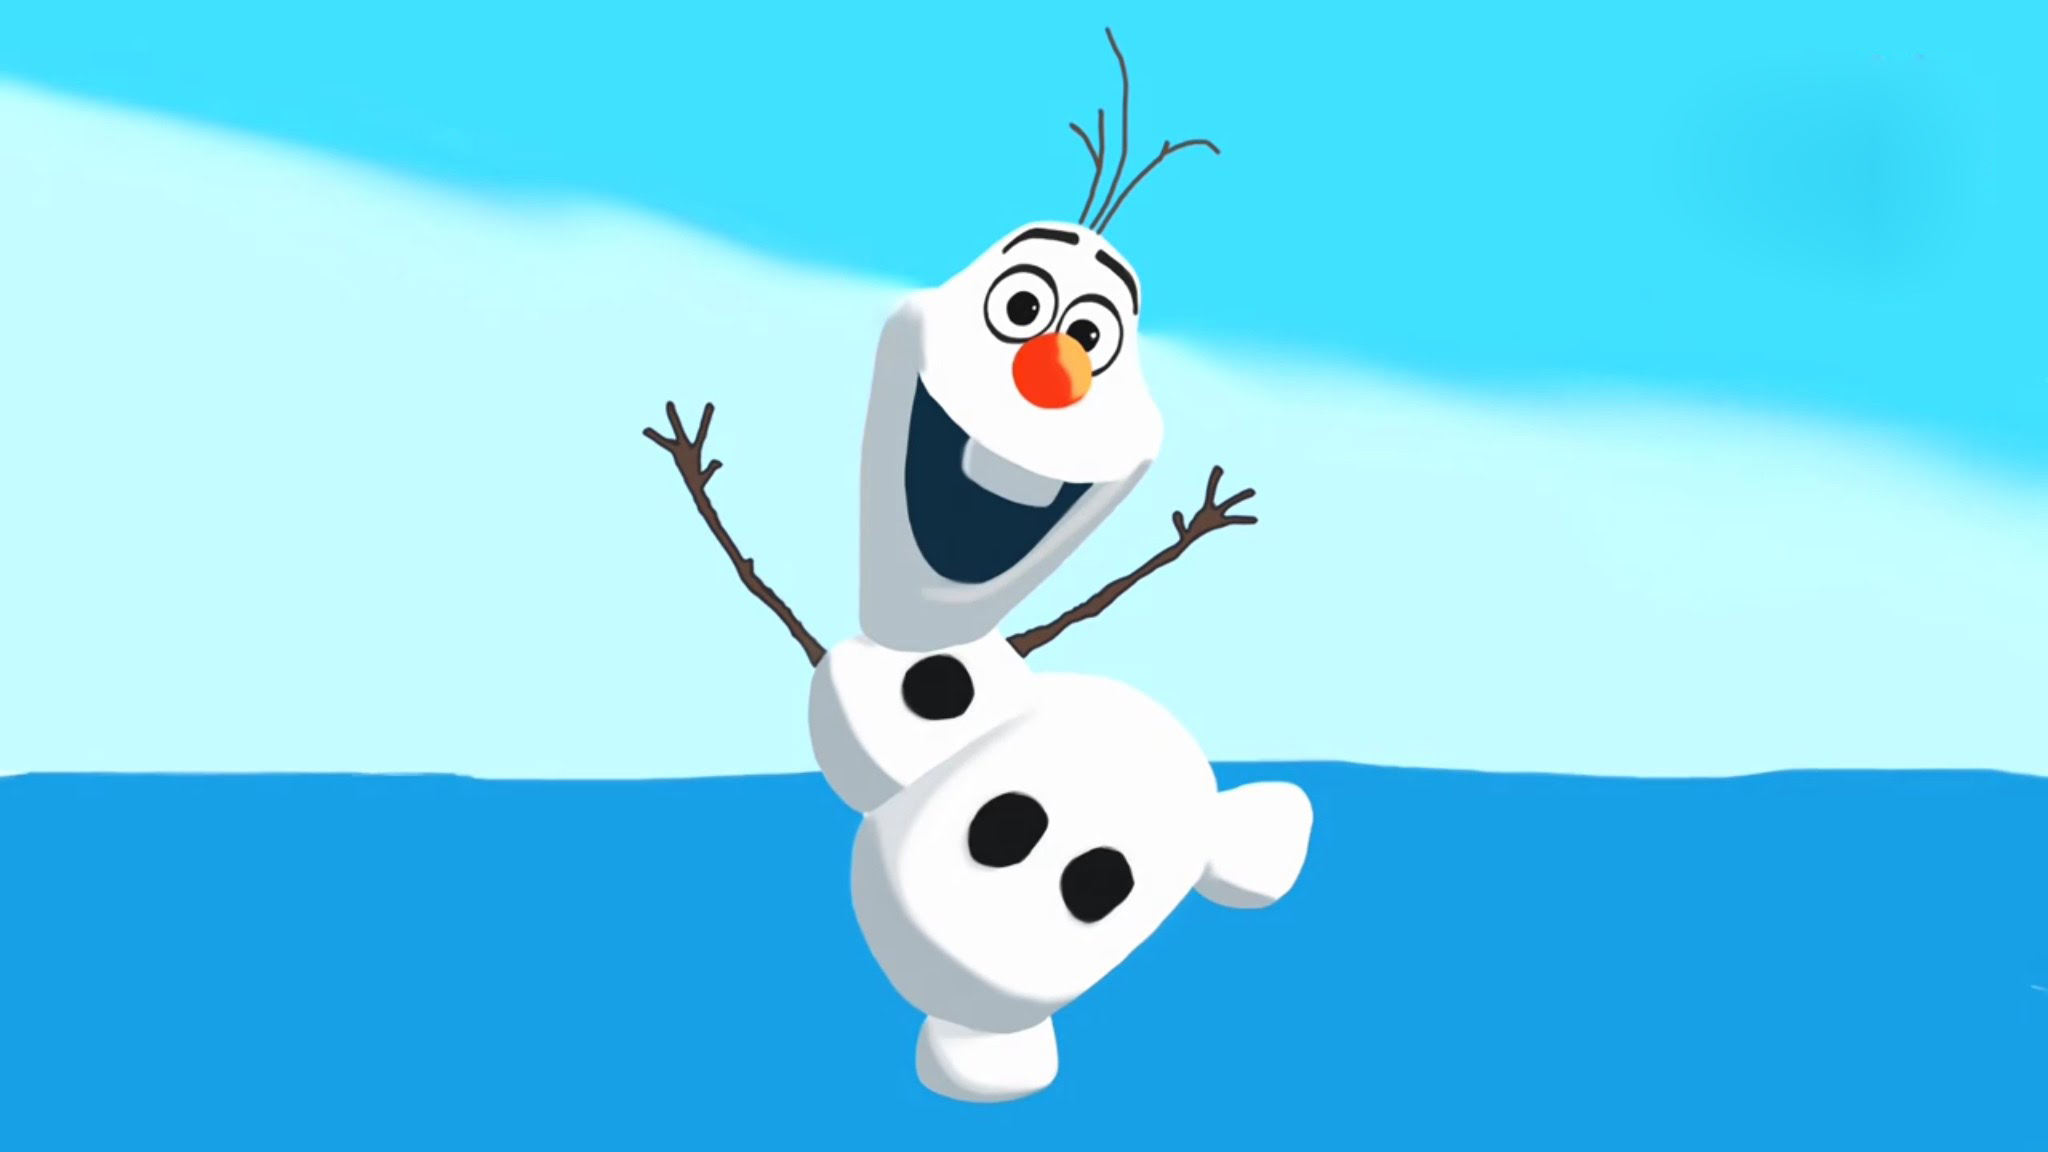 Free download Cute Olaf Wallpaper [2048x1152] for your Desktop, Mobile & Tablet. Explore Olaf Wallpaper. Disney Frozen Wallpaper, Frozen Wallpaper, Elsa Wallpaper